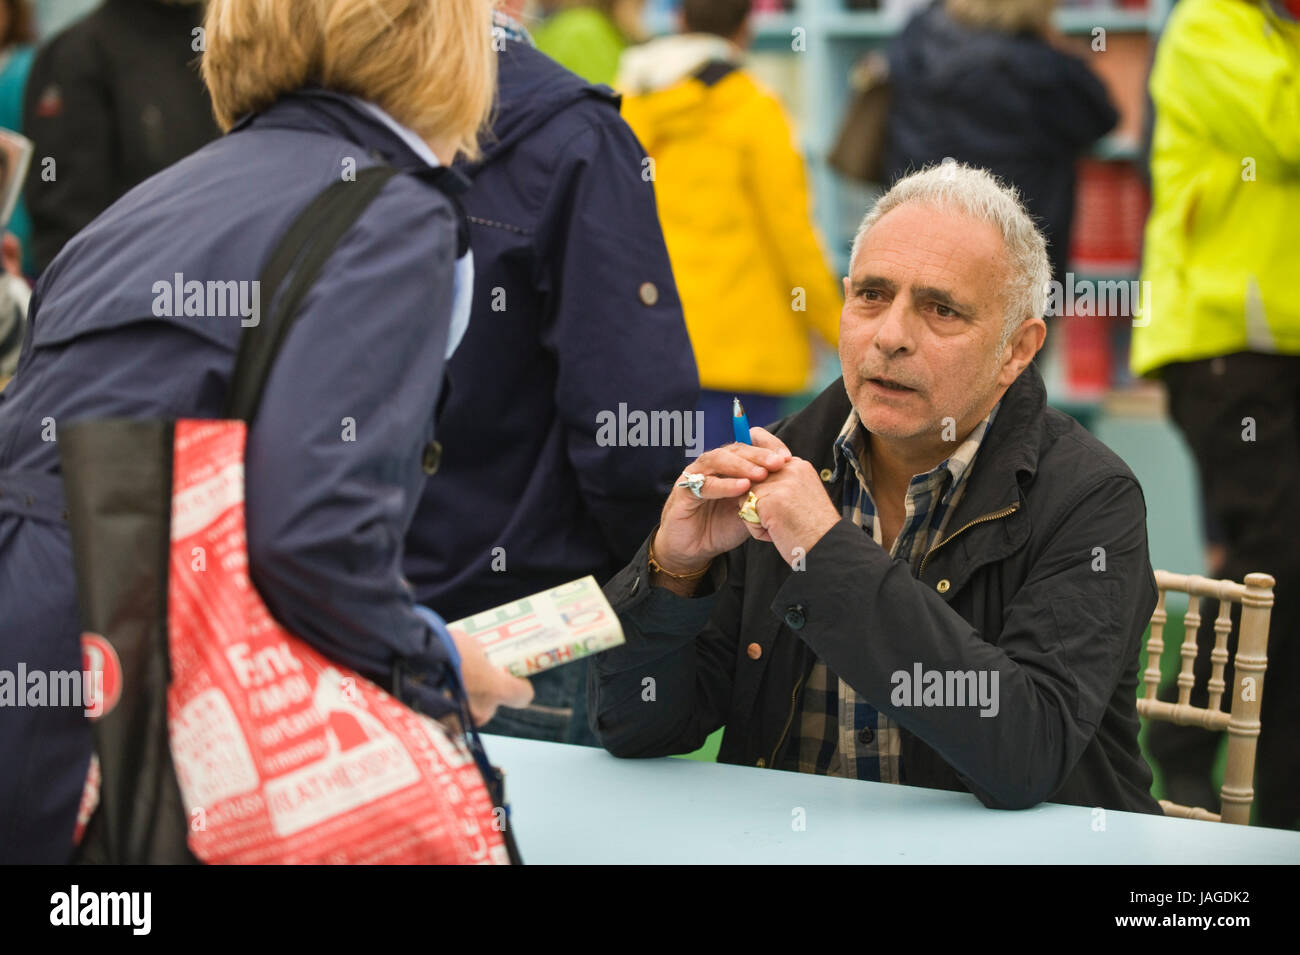 Hanif Kureishi screenwriter filmmaker & novelist pictured book signing for fans in the bookshop at Hay Festival 2017 Hay-on-Wye Powys Wales UK Stock Photo